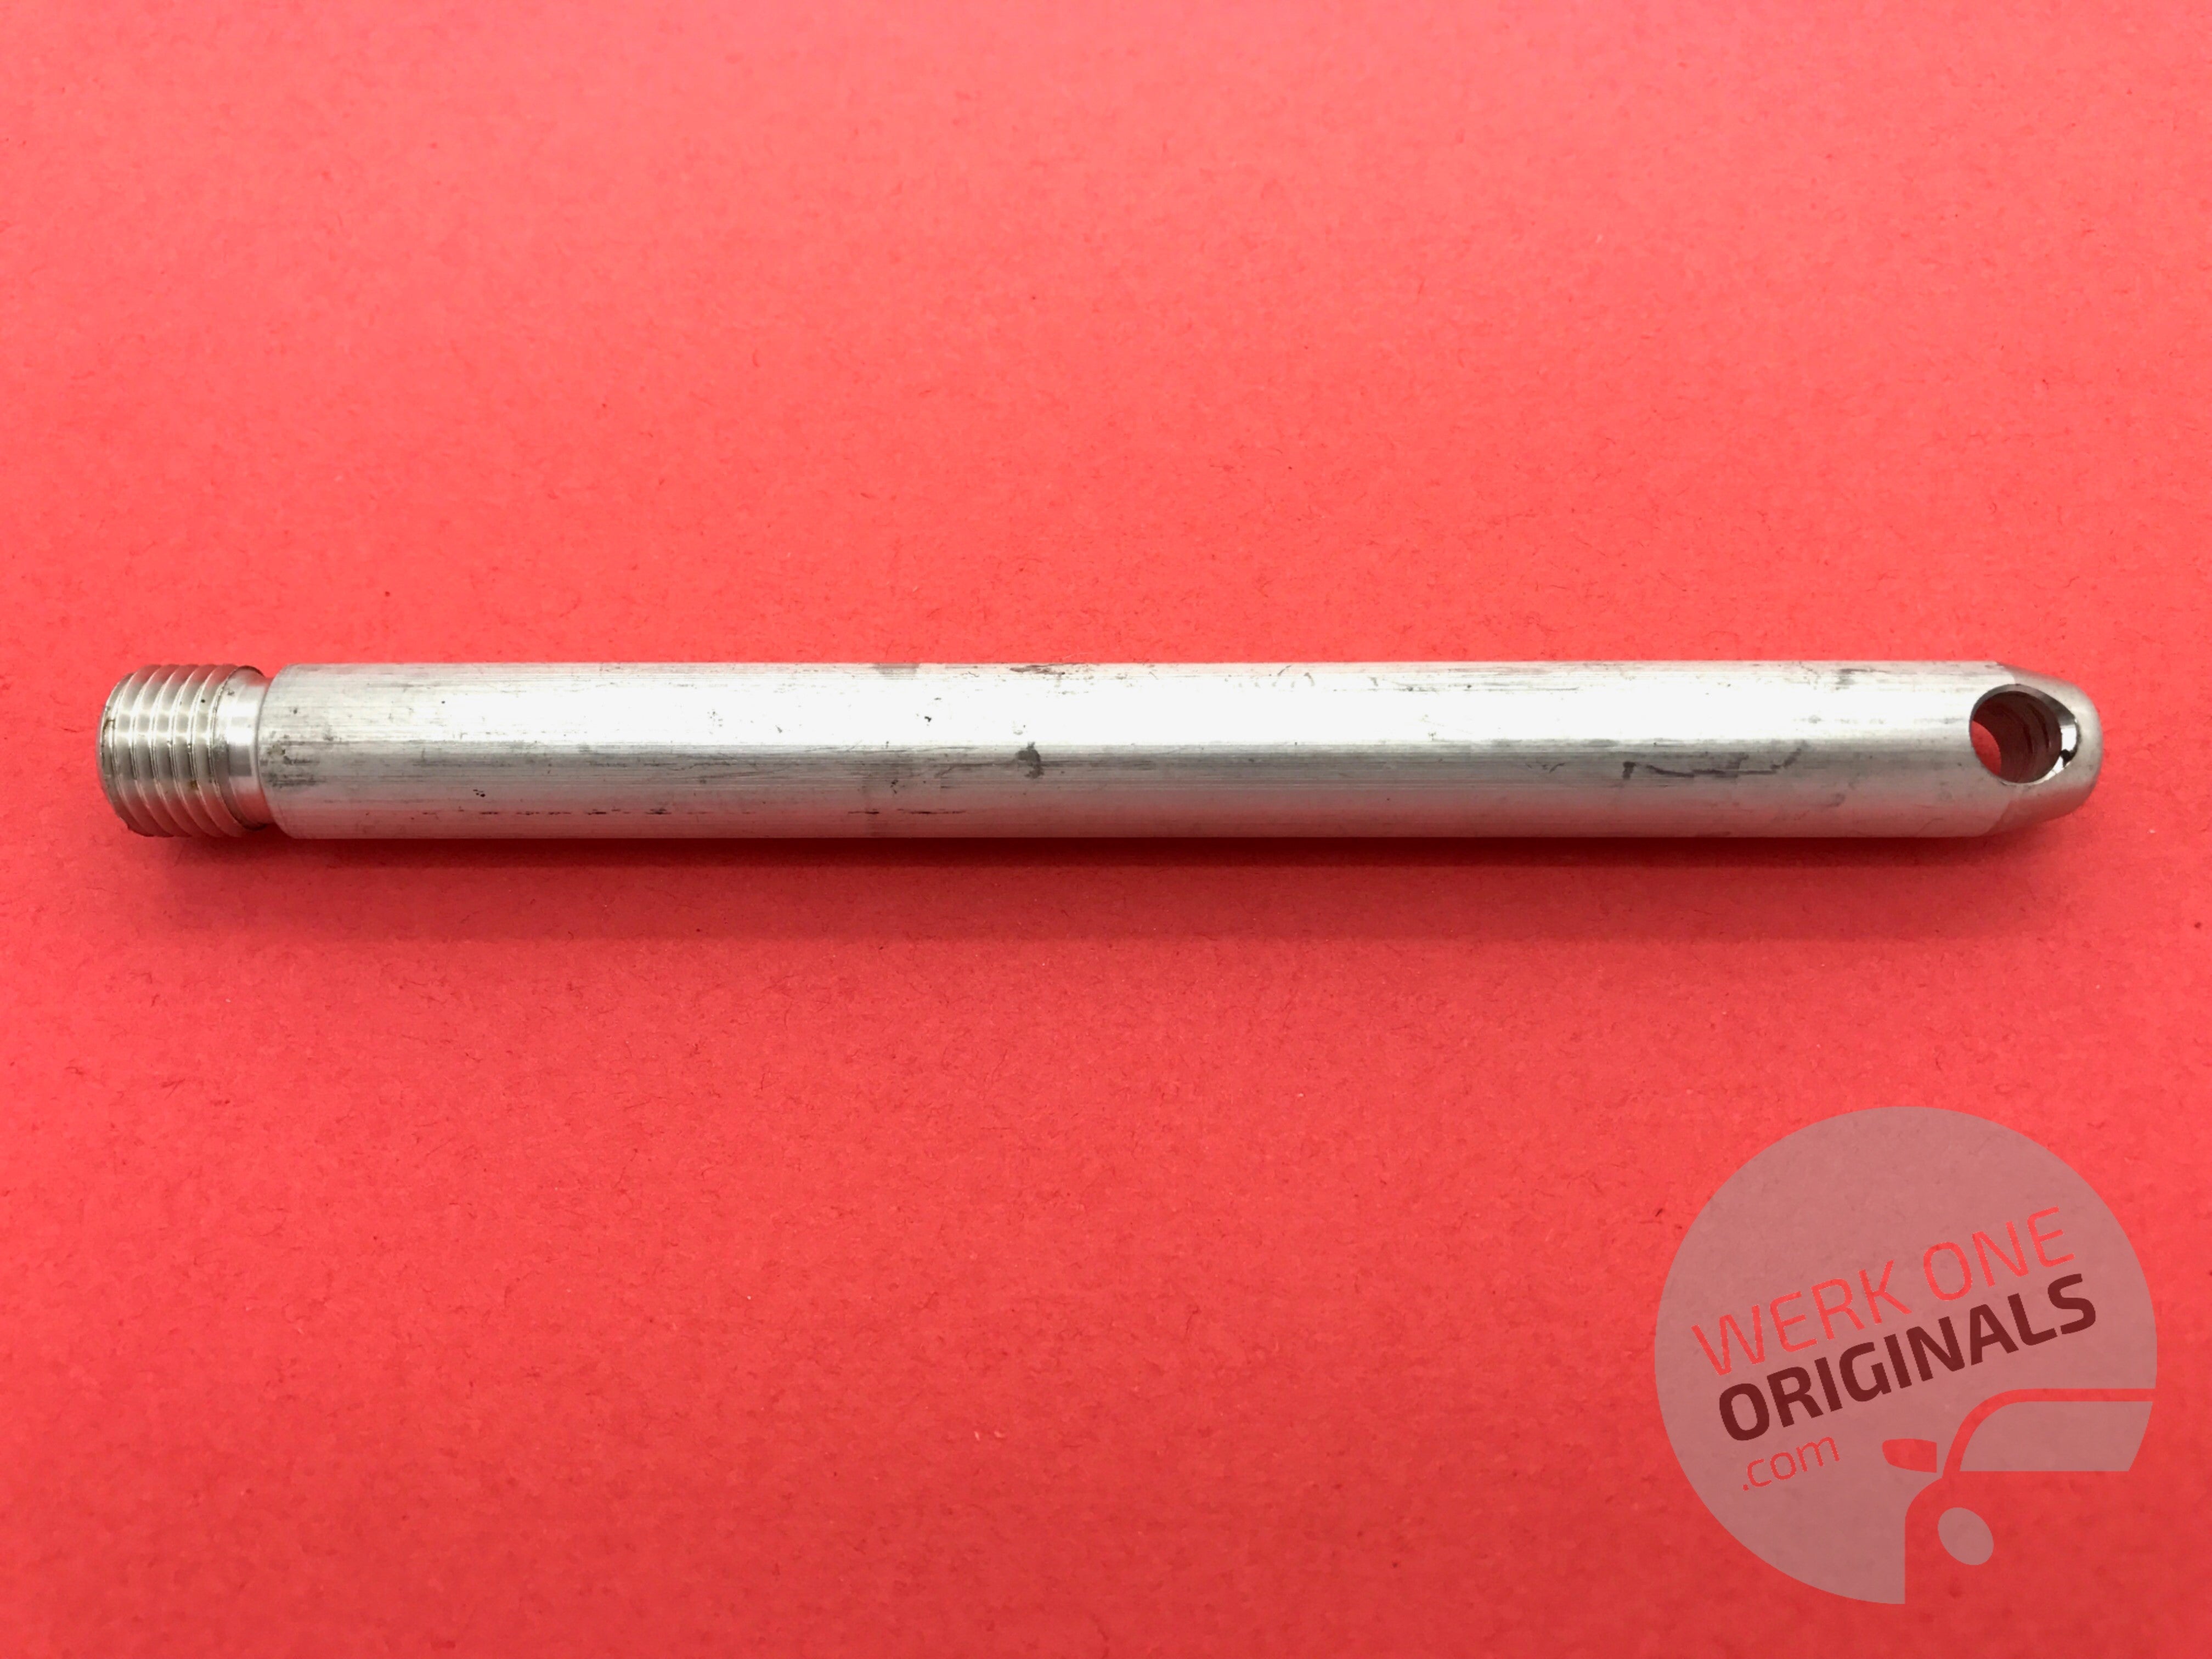 Porsche Official Wheel Removal Tool for Panamera Type 907 & 970 Models